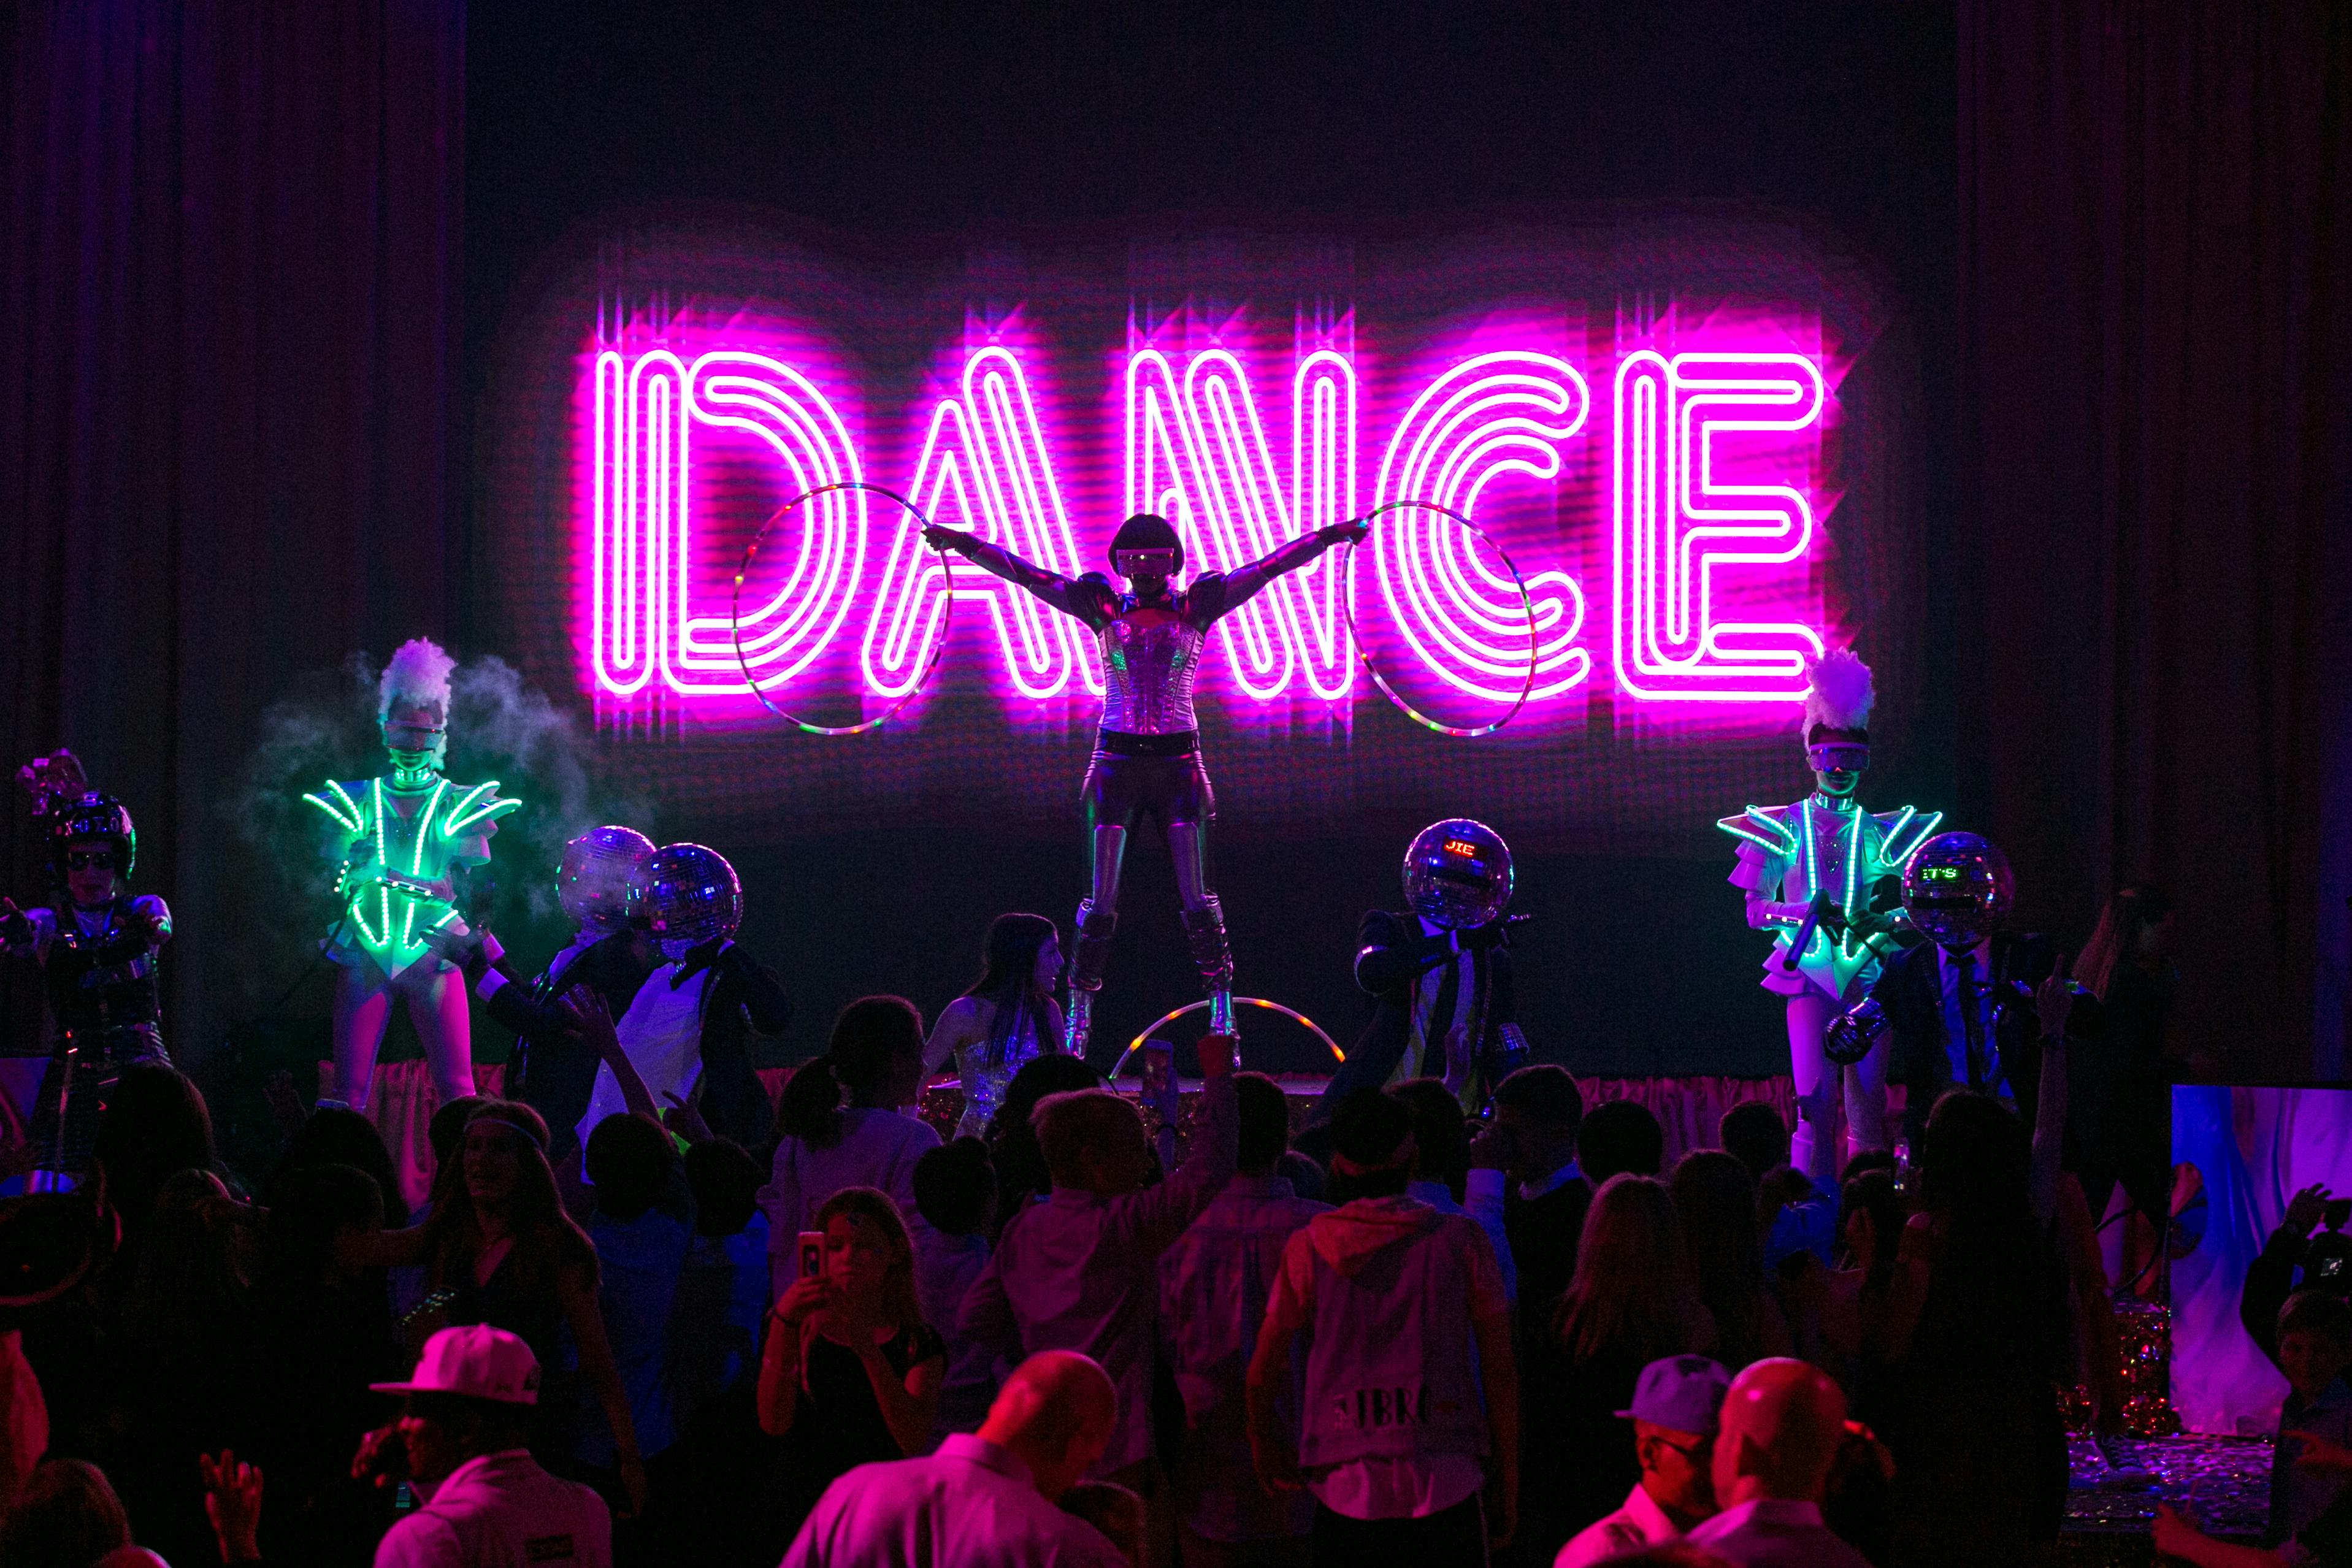 Award Show Themed Bat Mitzvah at The Howard Theatre with Pink Neon Signage | PartySlate